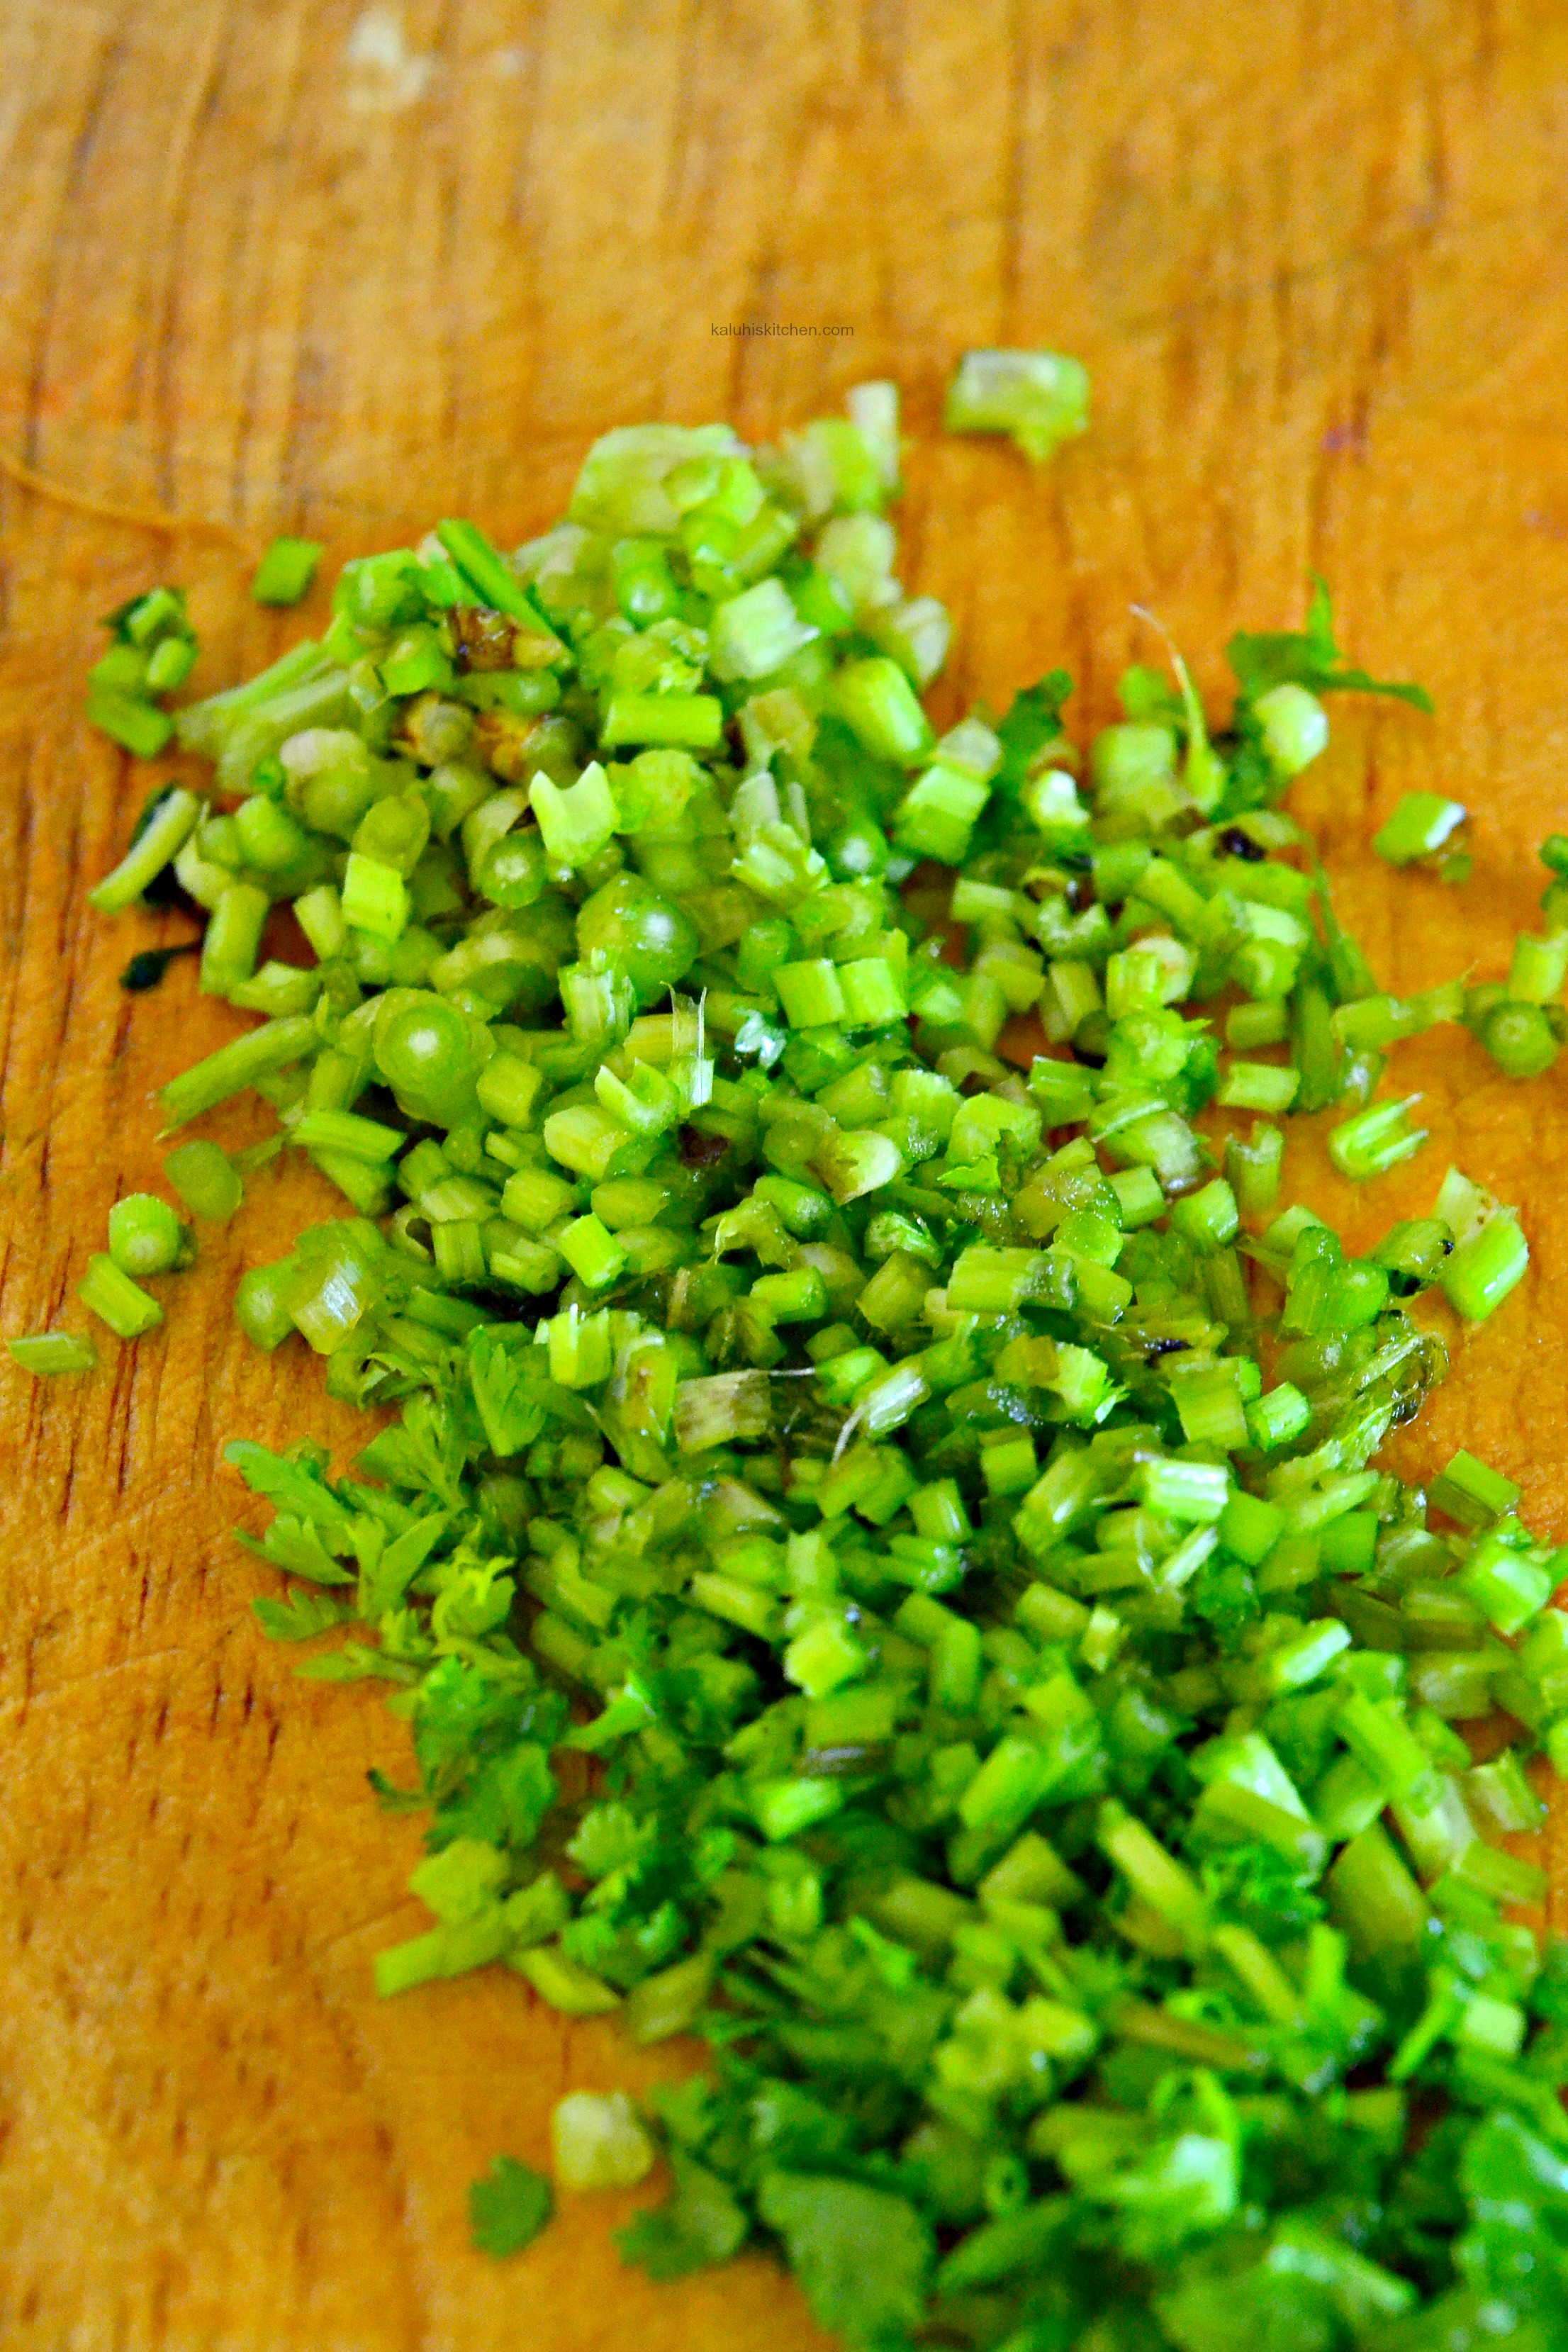 using-finely-chipped-coriander-stalks-adds-plenty-of-flavor-to-food-and-also-makes-the-food-have-a-more-intense-herby-flavor_carror-sticks_kaluhiskitchen-com